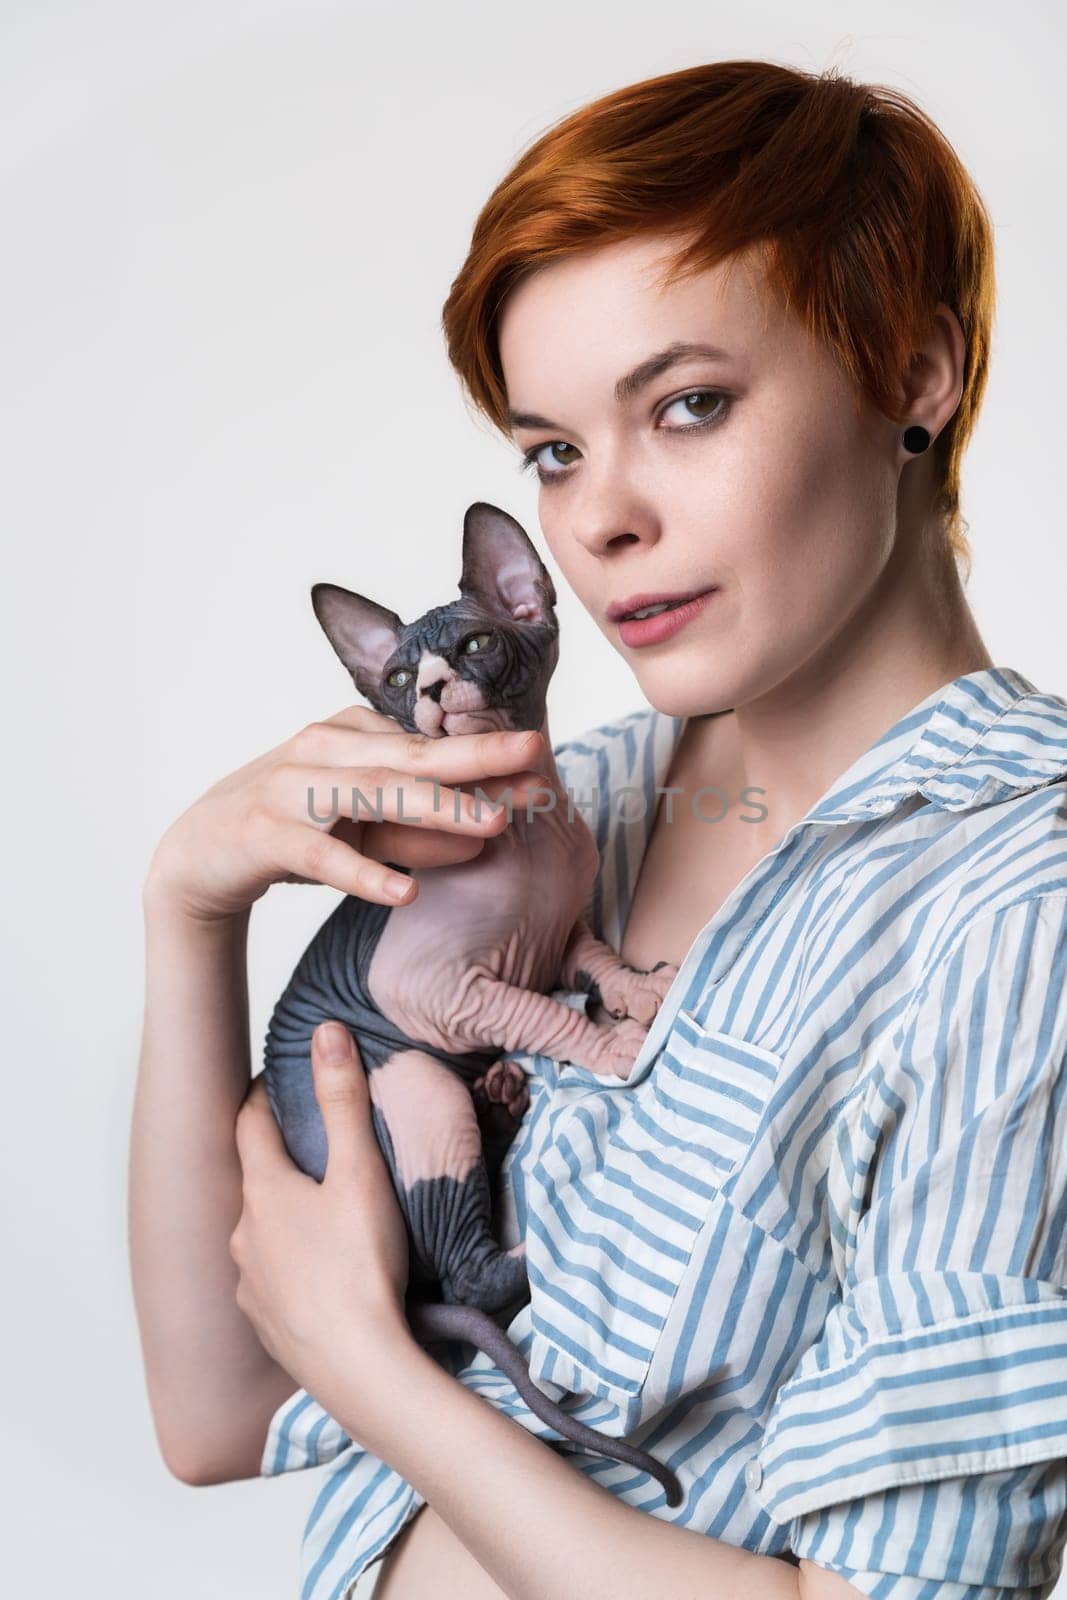 Portrait of redhead young woman holding Sphynx Cat in hands and looking at camera. Hipster female with short hair dressed in striped white-blue shirt. Studio shot on white background. Part of series.